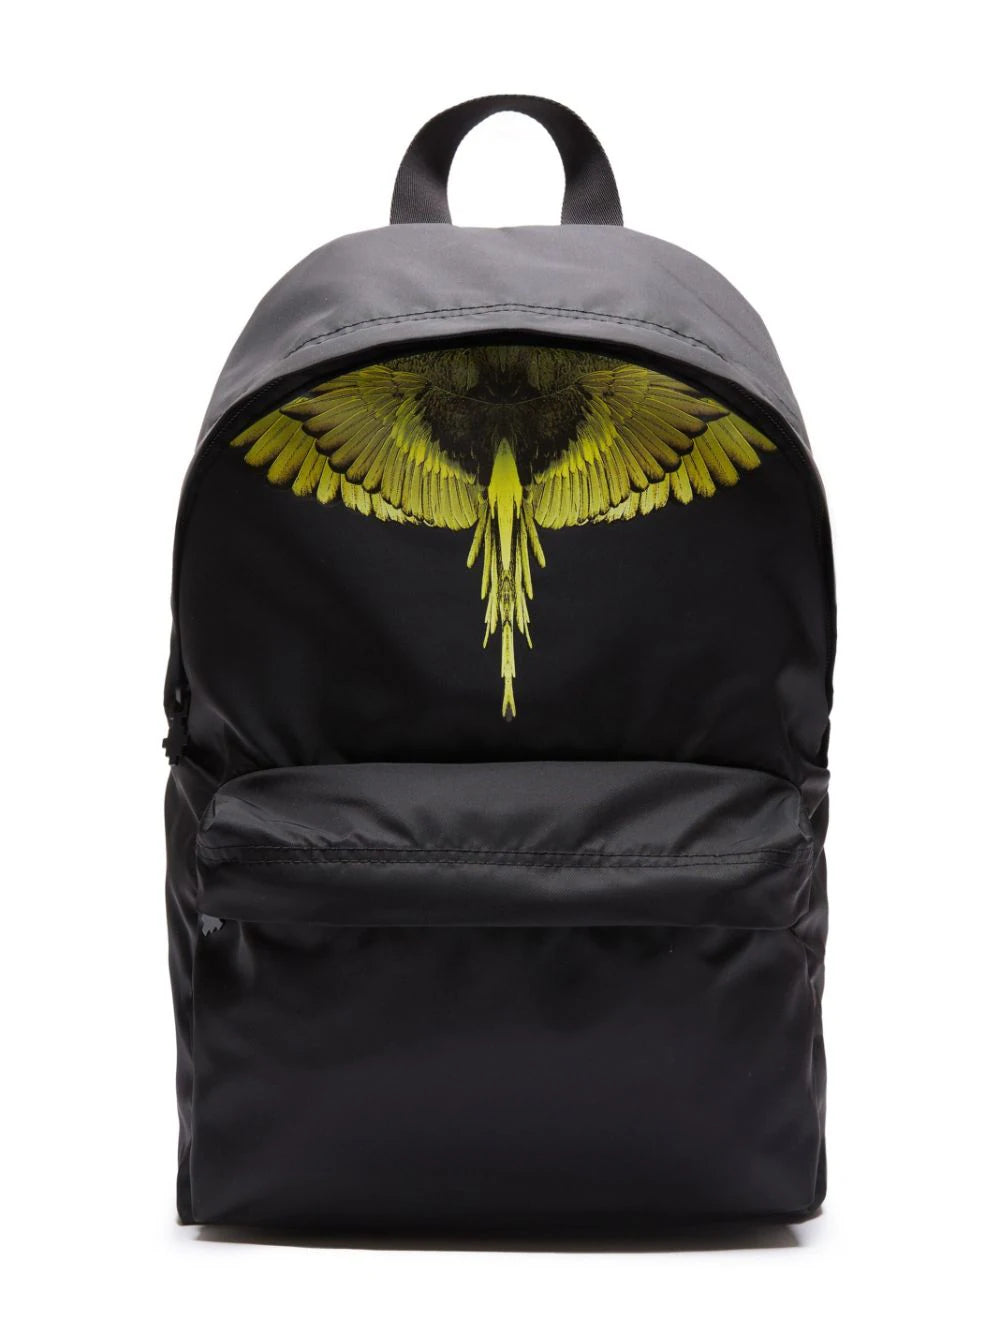 ICON WINGS BACKPACK حقيبة ظهر